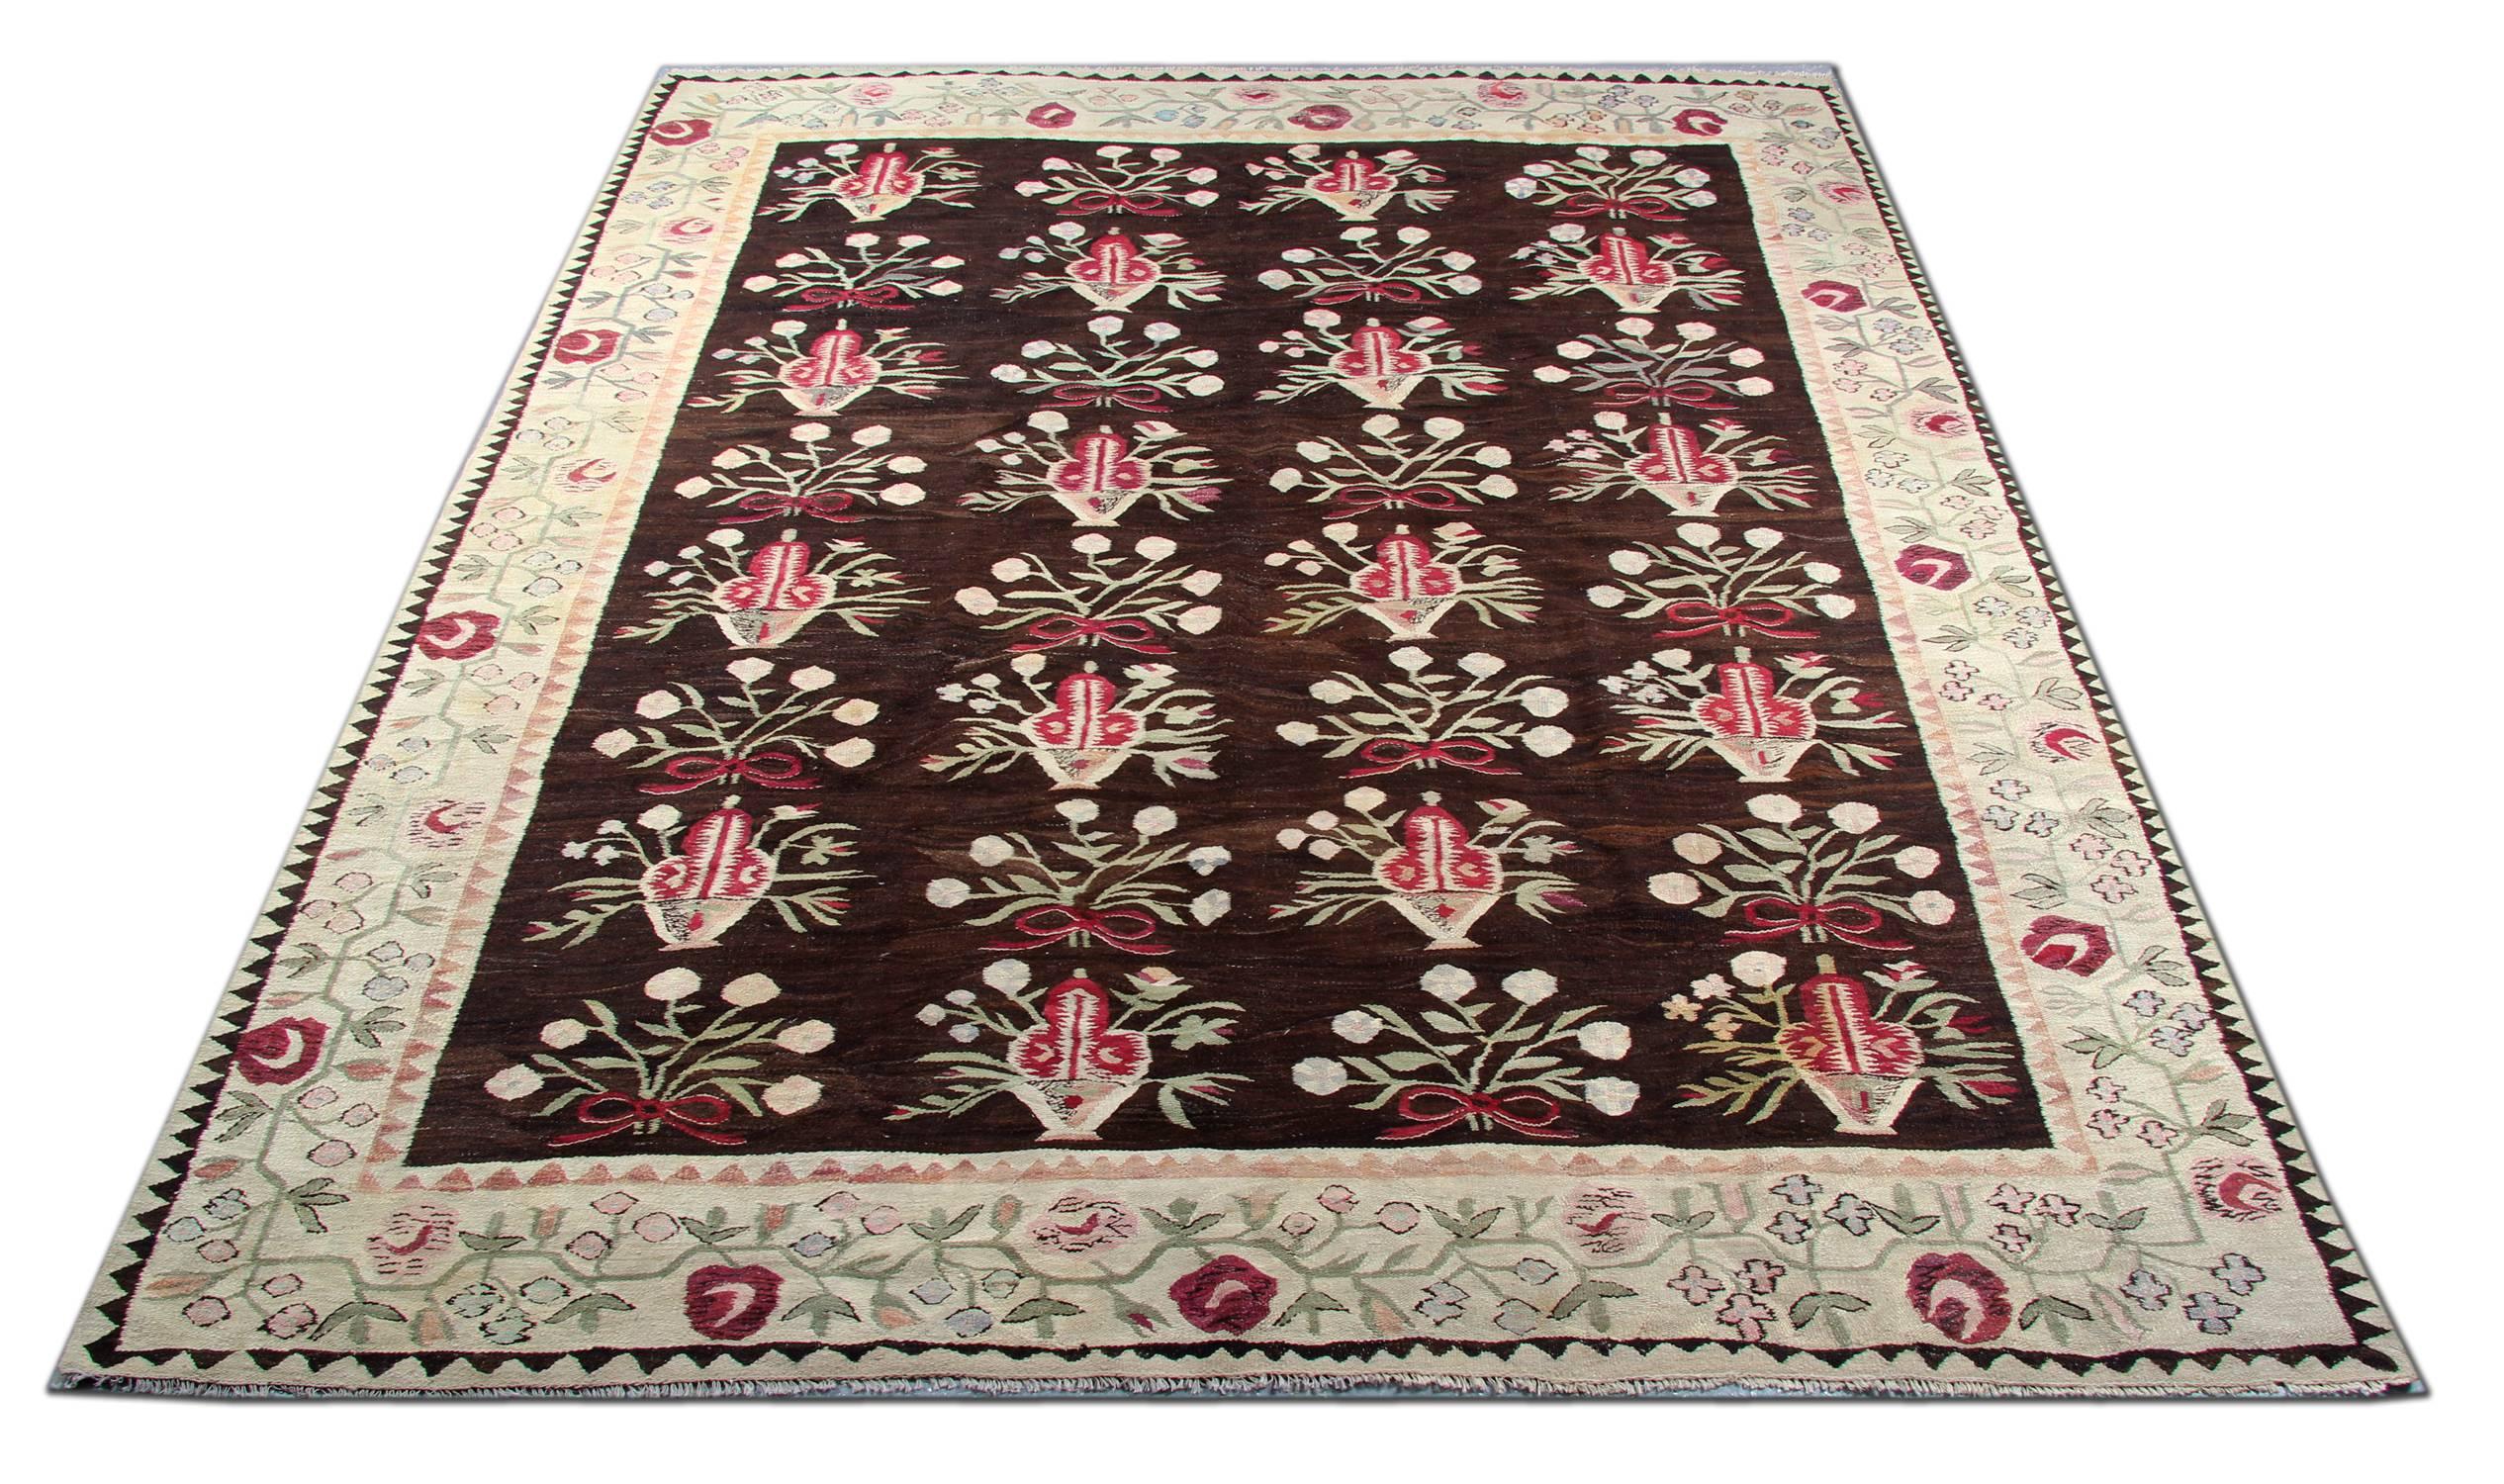 Handmade carpet Large and colourful kilim rugs would complement your home as floor rugs and interior objects of home decor. These large Kilims look beautiful and would stand out as hallway rugs or bedroom rugs. This Kelim is an excellent example of